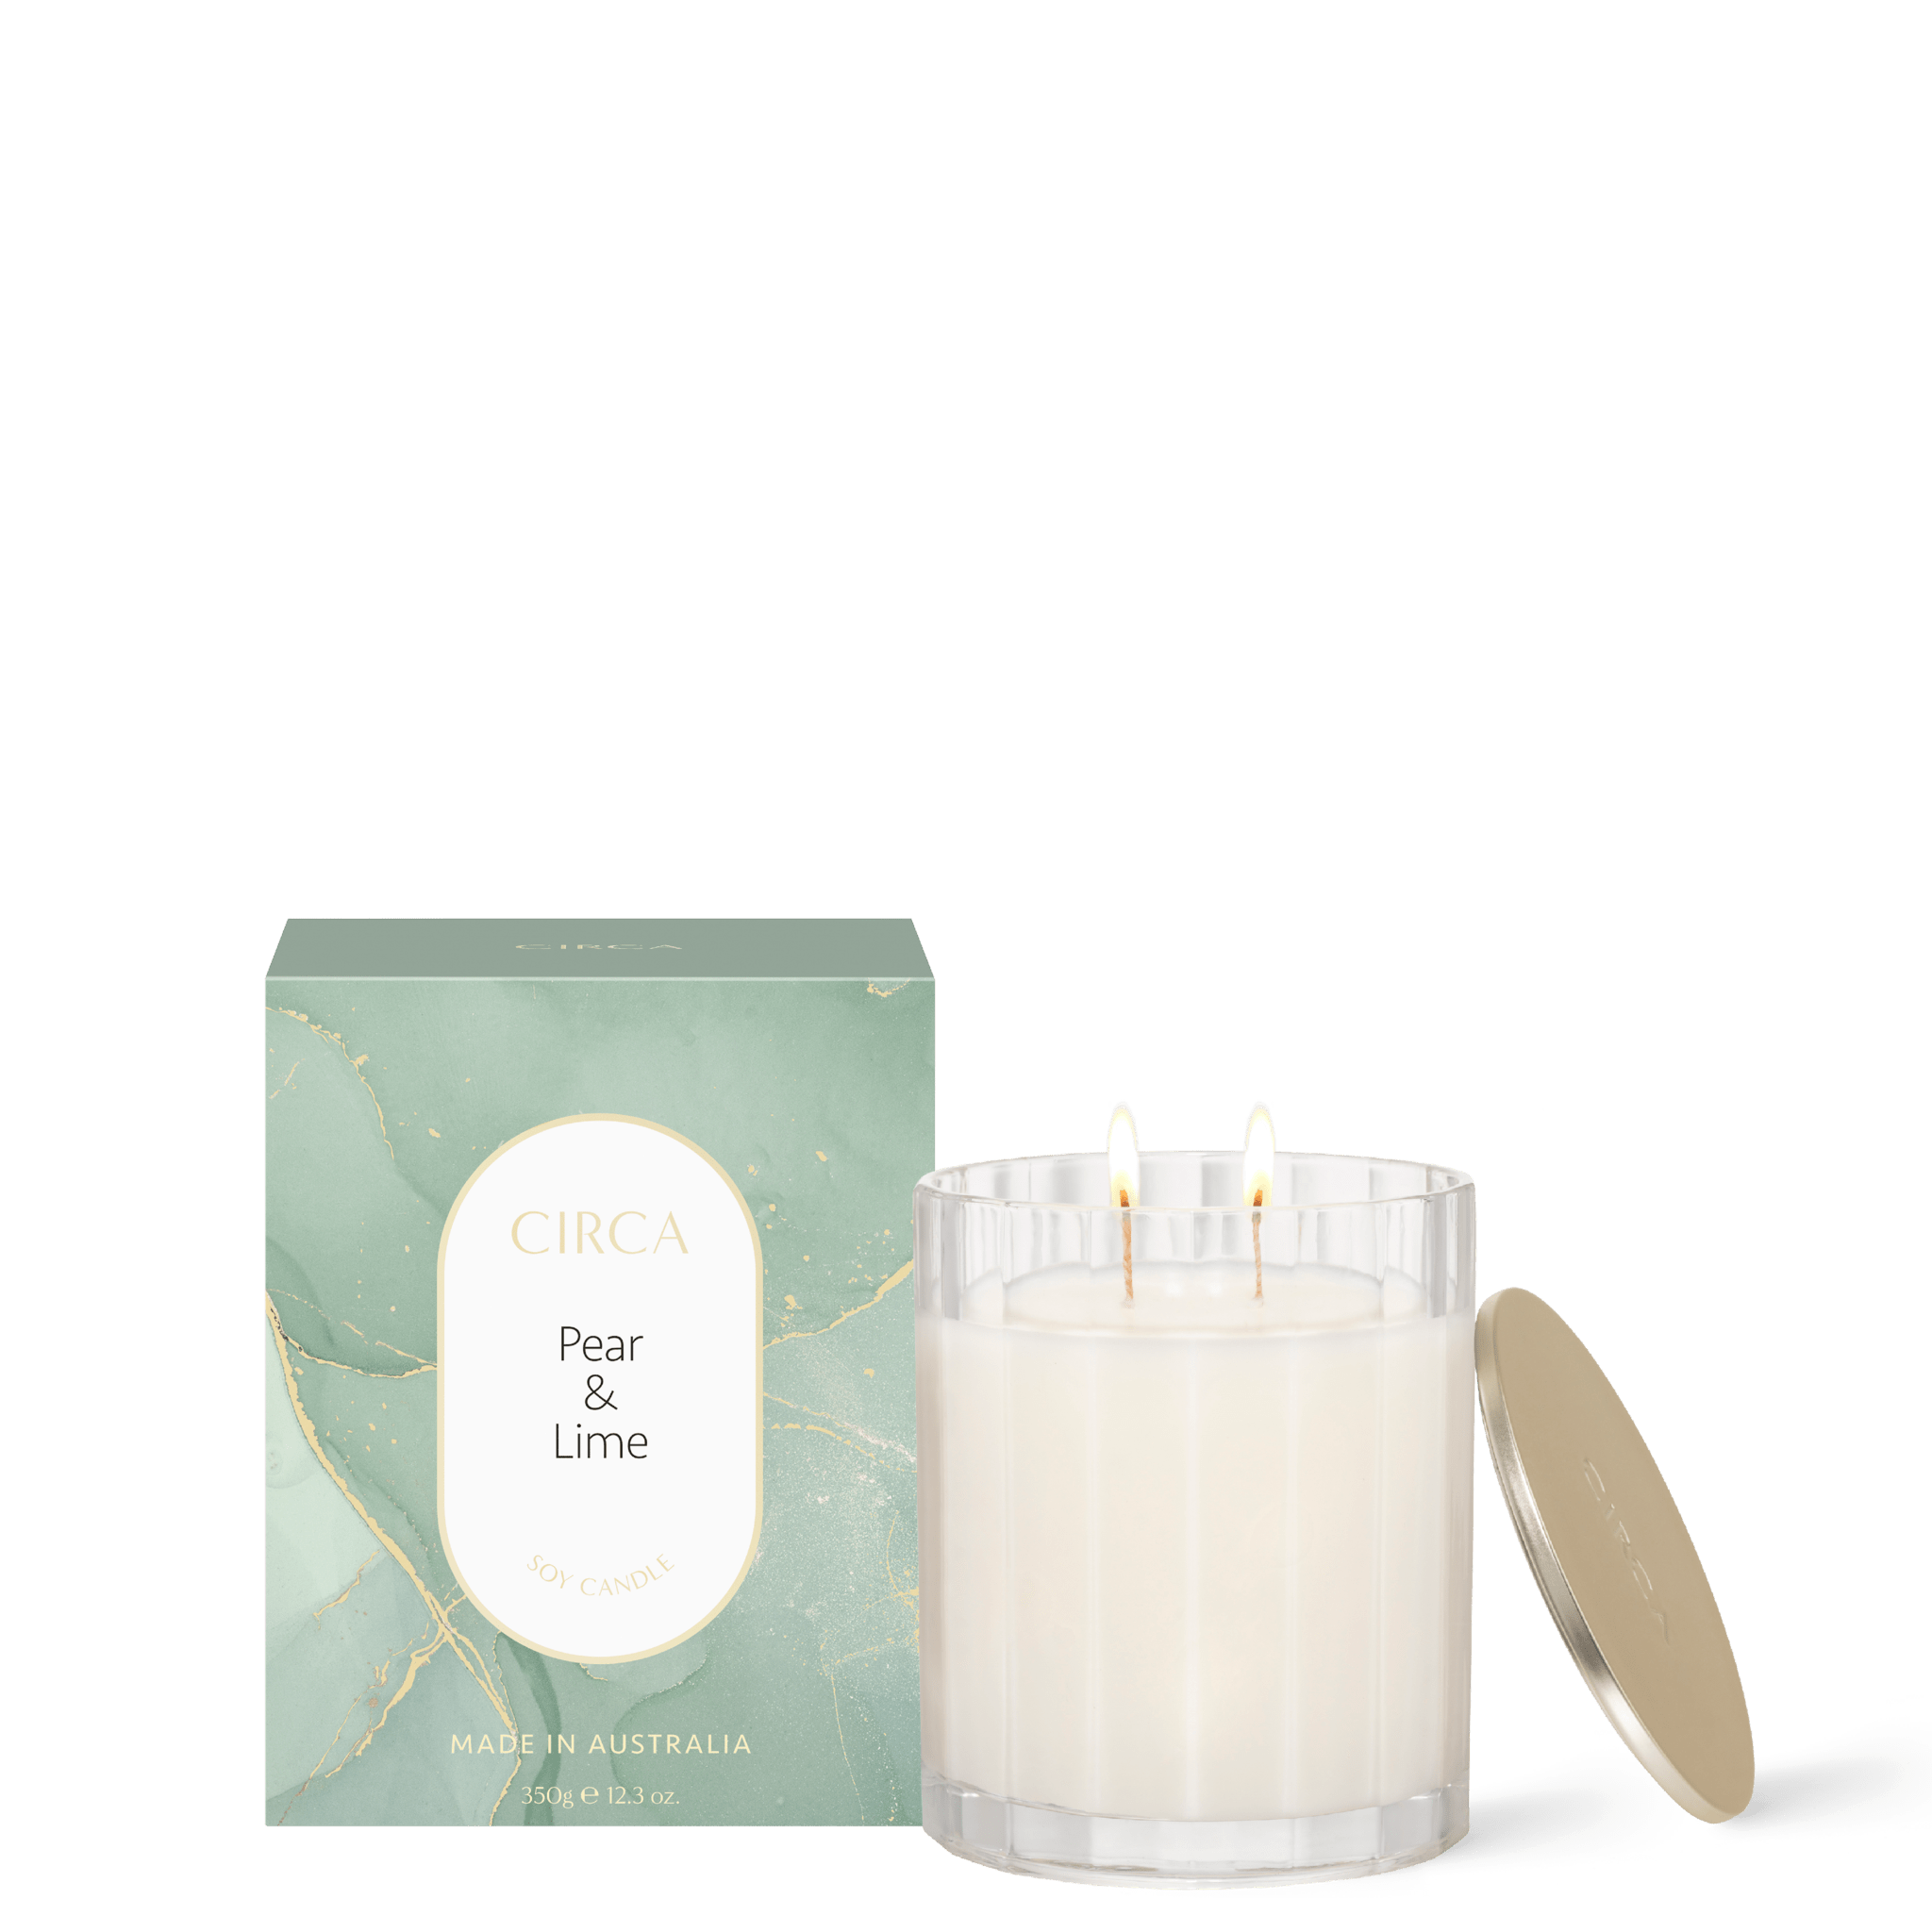 CIRCA Pear & Lime Candle 350g